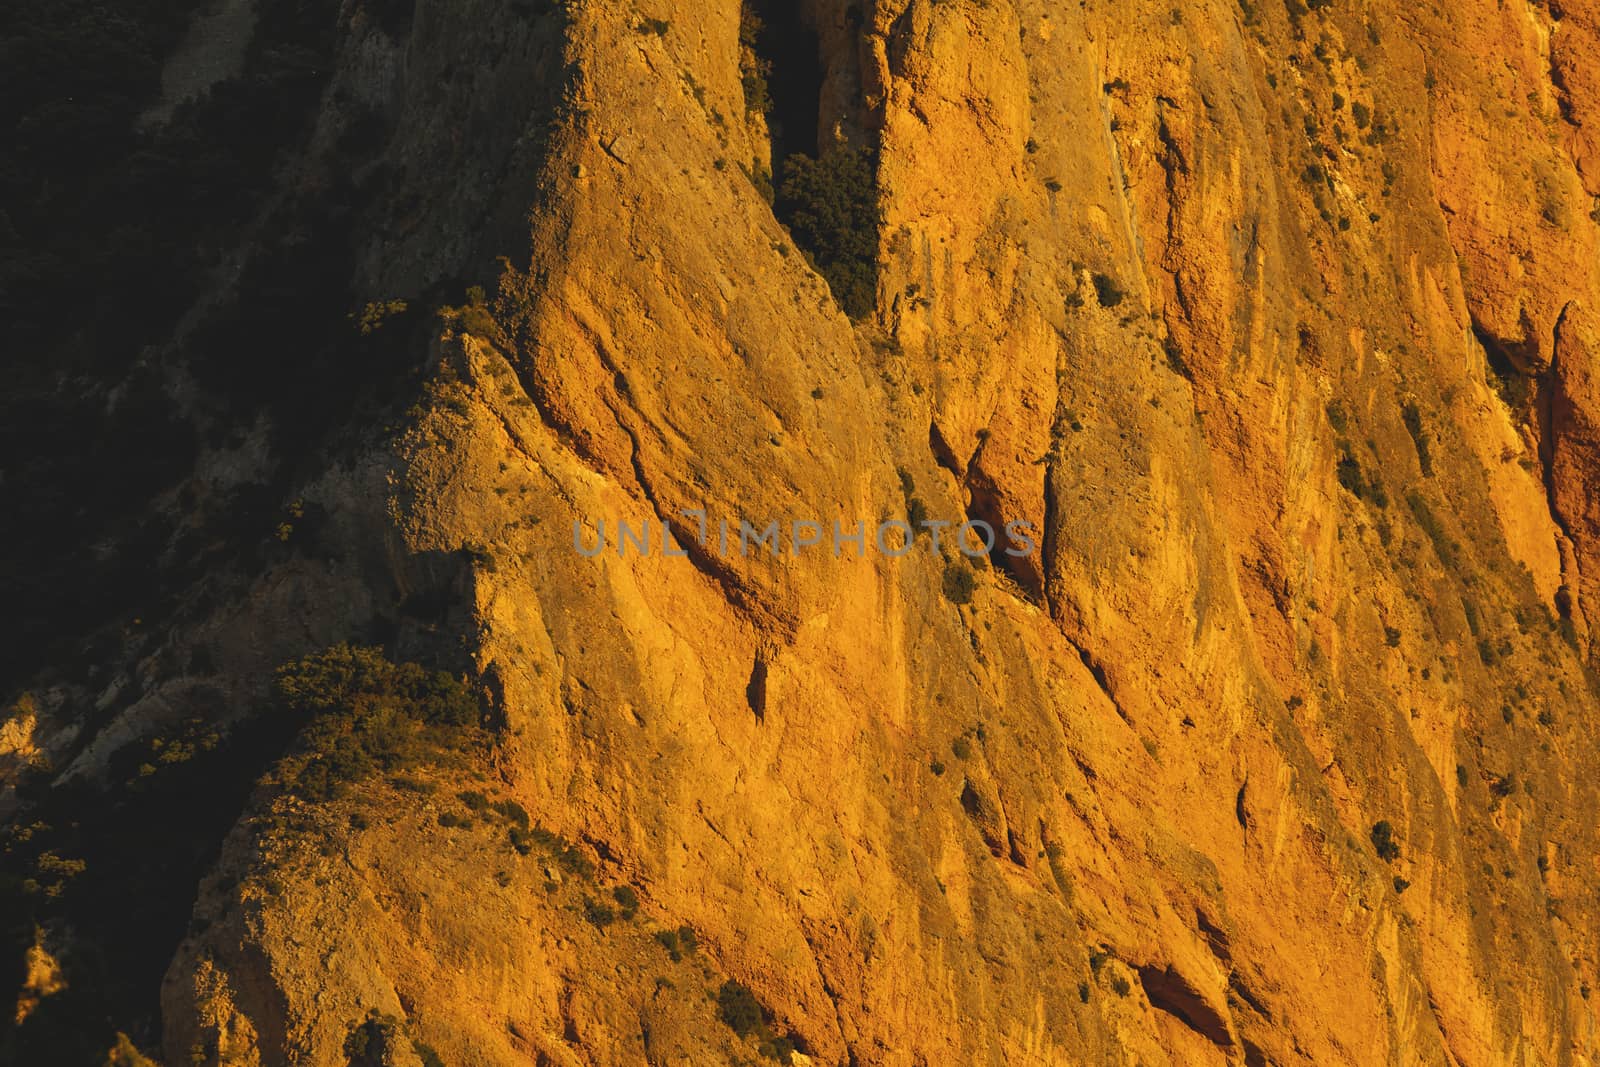 Mountains of the Mallos de Riglos, vertical rock walls at sunset, a famous place for climbing near the Gallego river, in the pre-Pyrenees, Huesca province, Aragon, Spain.